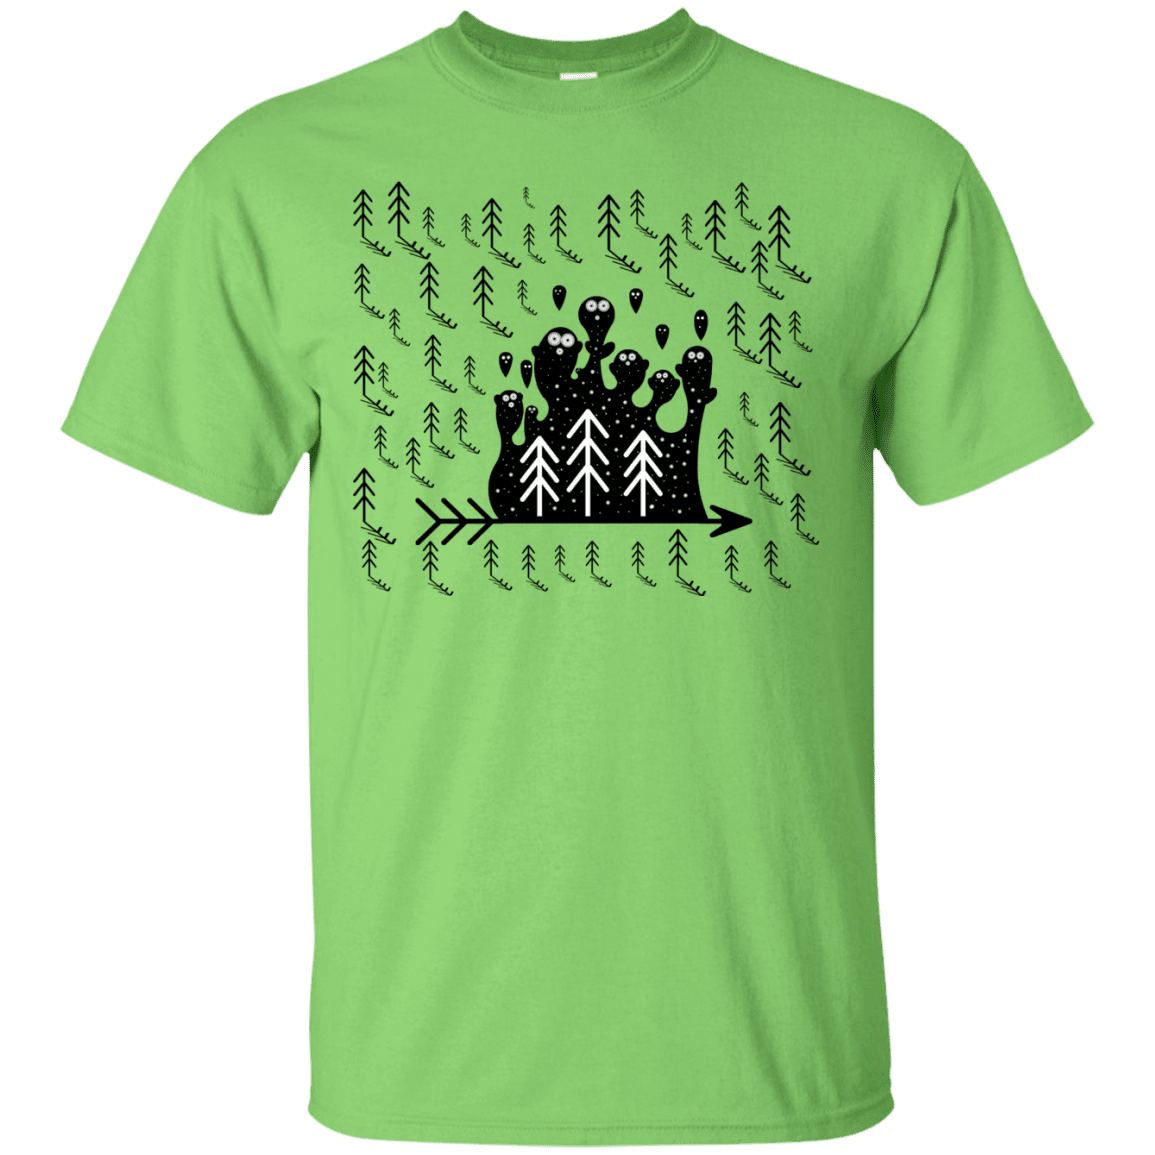 T-Shirts Lime / S Campfire Stories T-Shirt